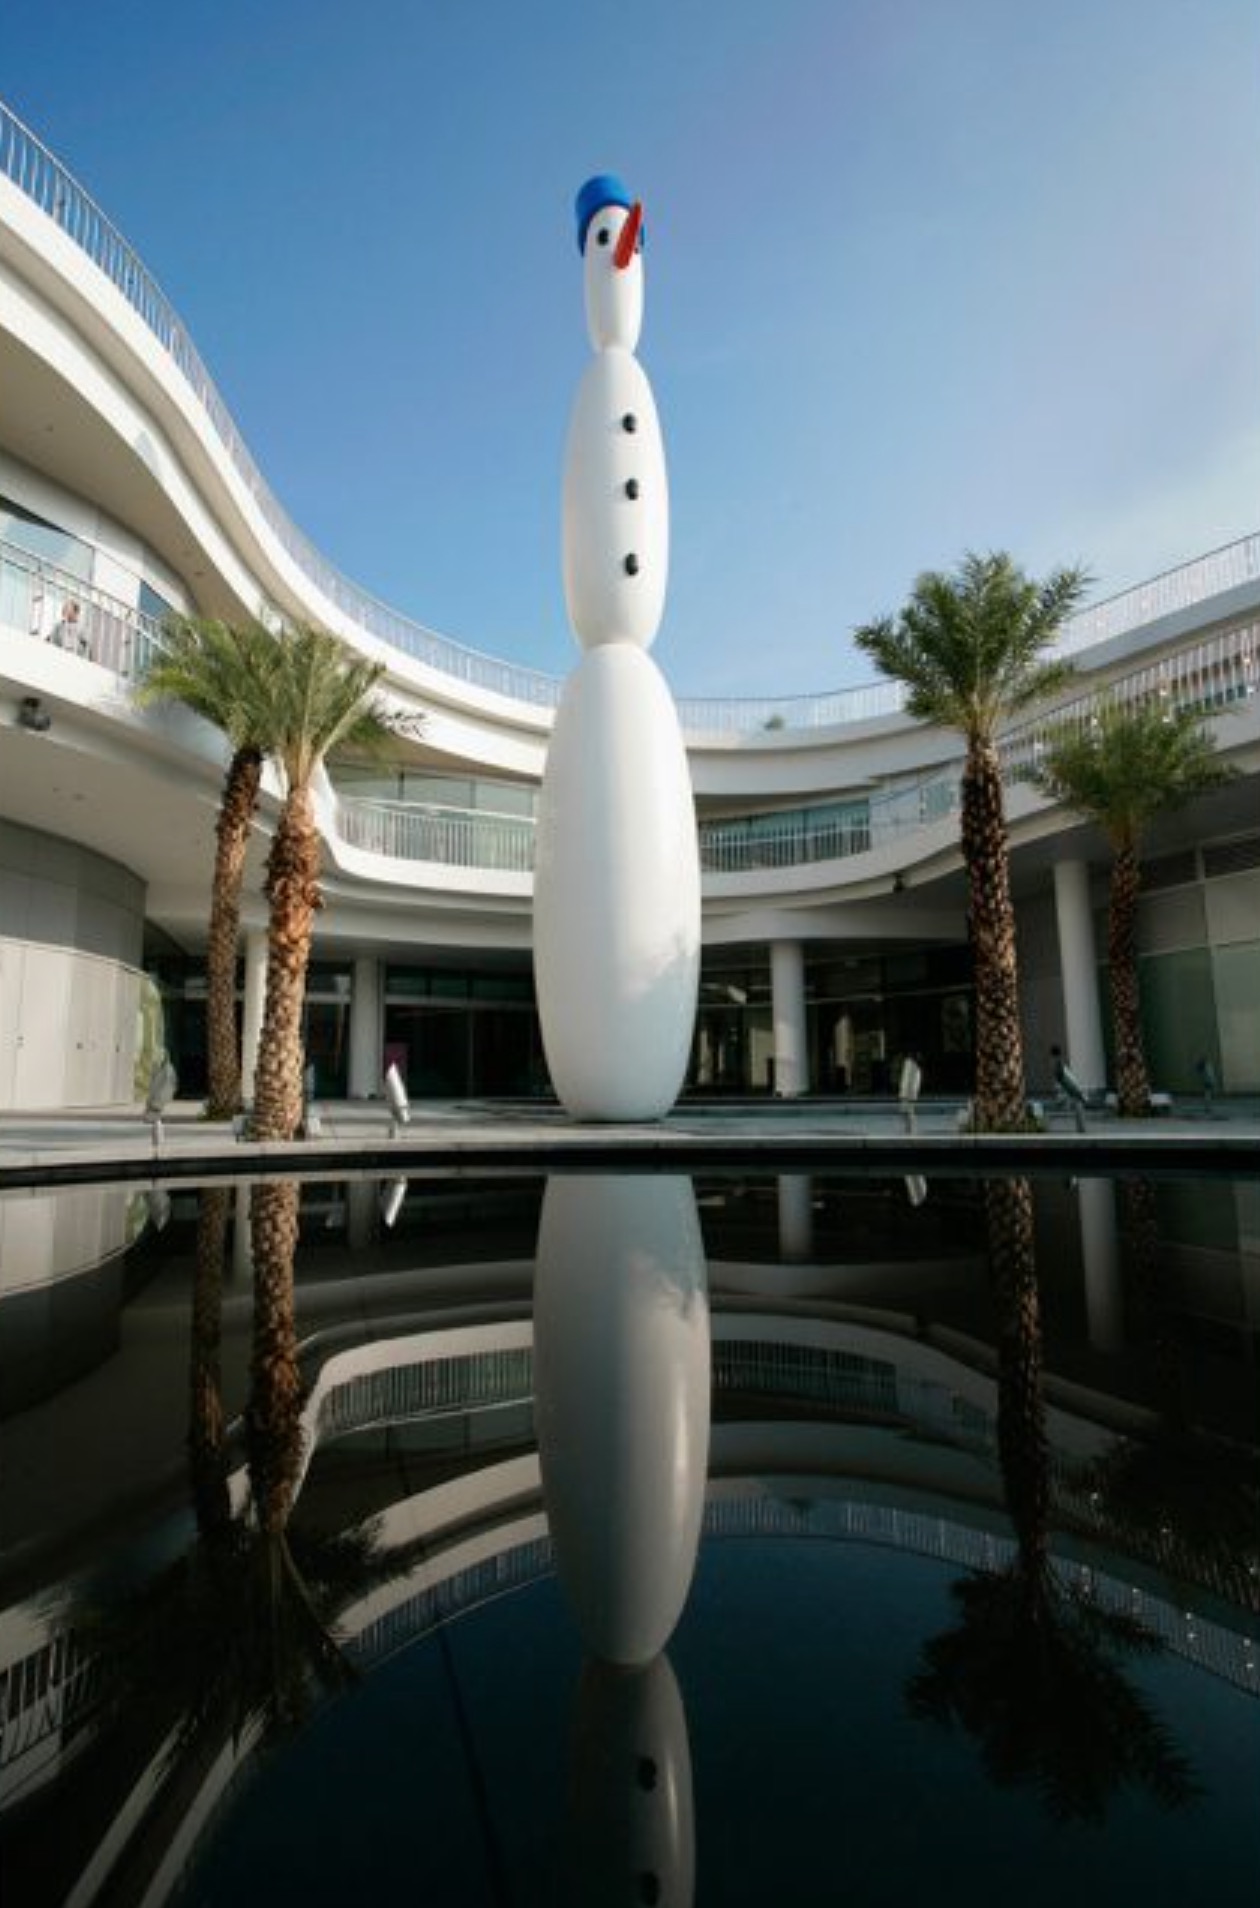 Snowman / Snowflake, 2006, Singapore, by Inges Idee 